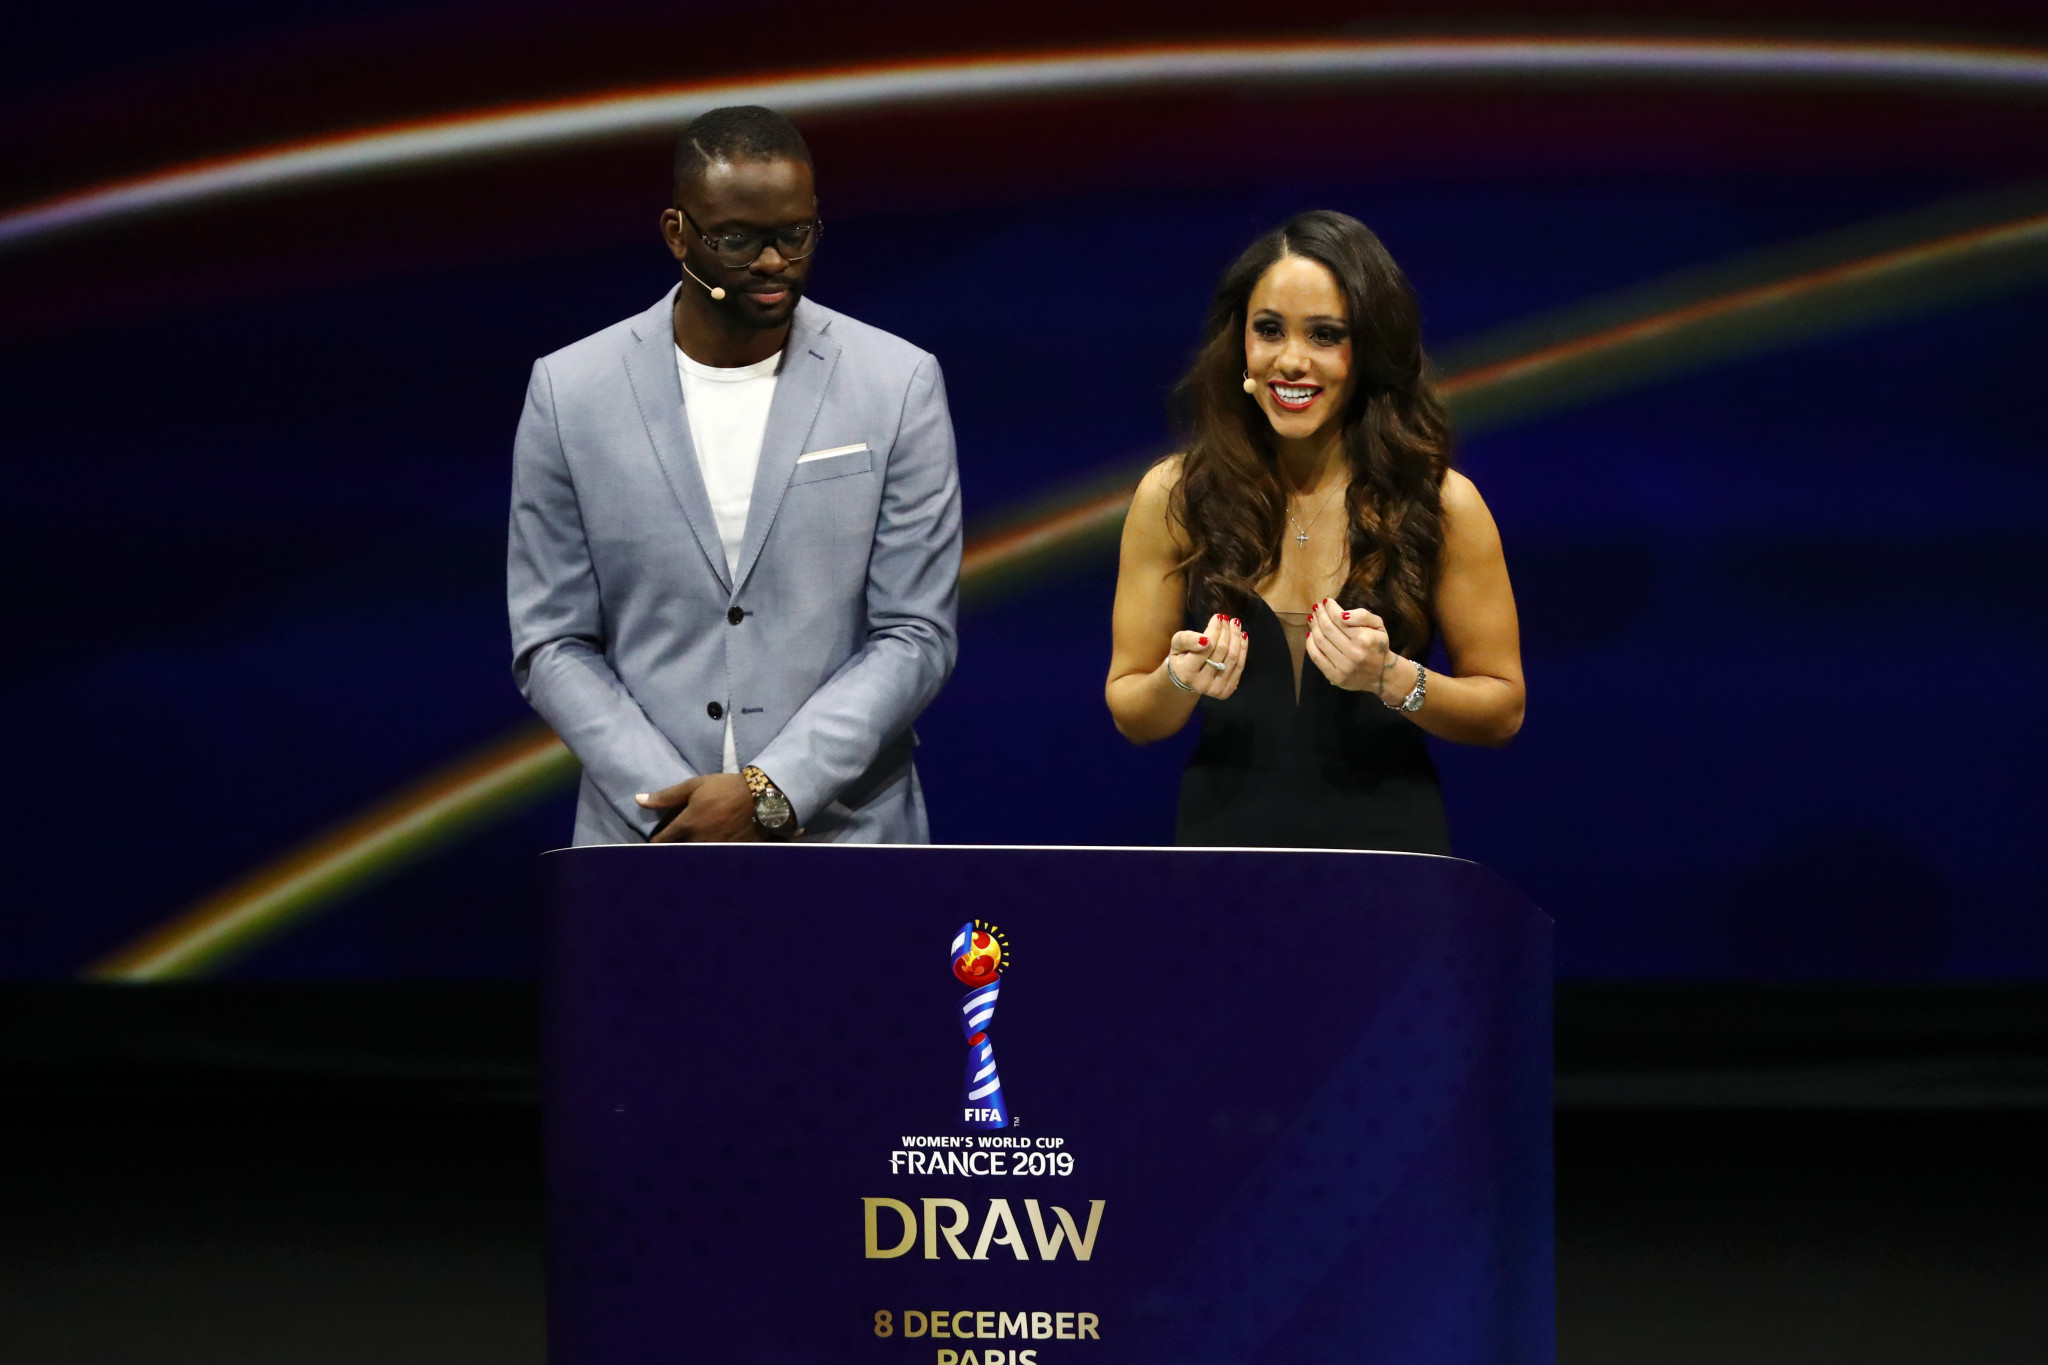 Individual tickets to next year's Women's World Cup in France became available following the draw for the tournament ©Getty Images